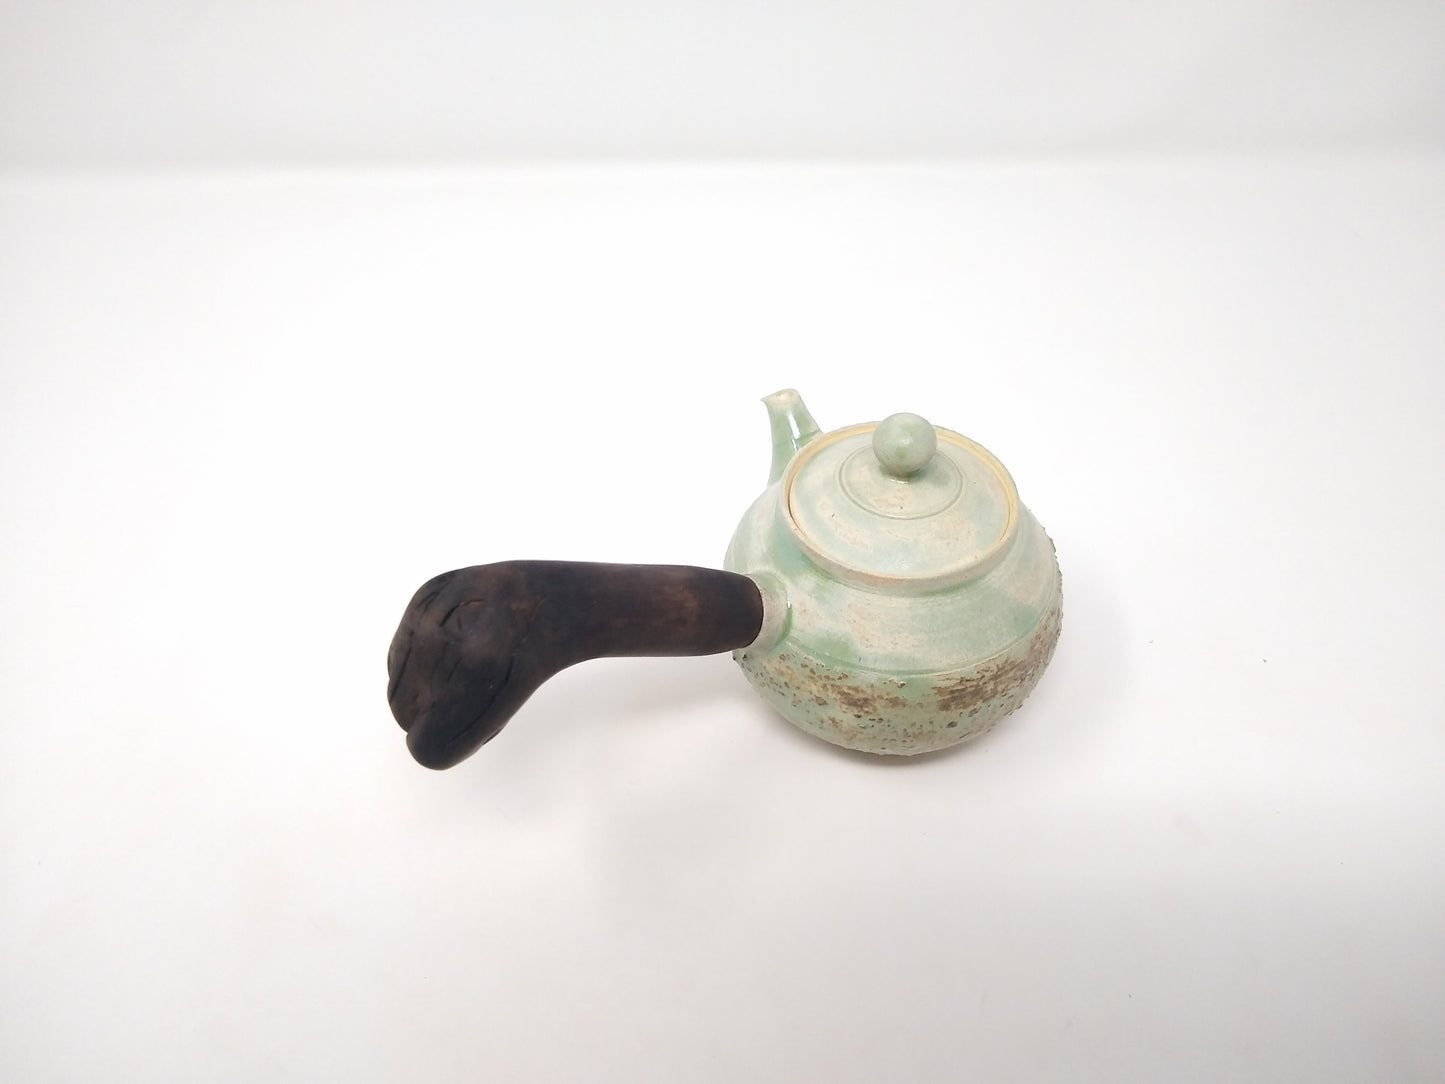 180ml "Emerald Mist" Kyusu with a matching bowl